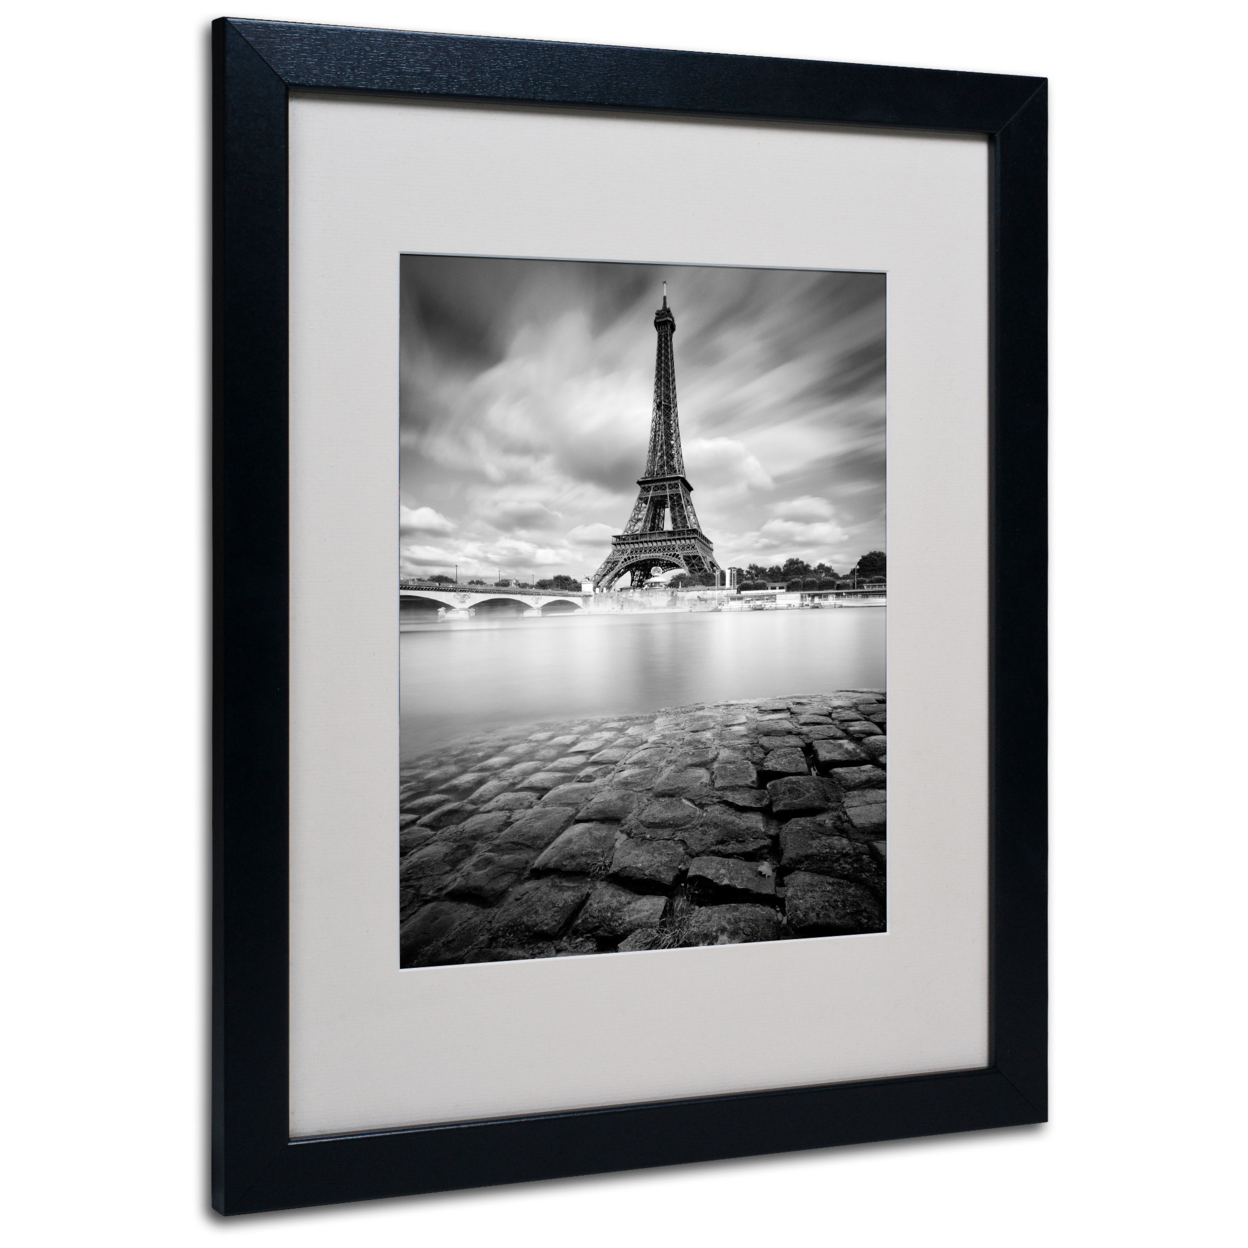 Moises Levy 'Eiffel Tower Study I' Black Wooden Framed Art 18 X 22 Inches